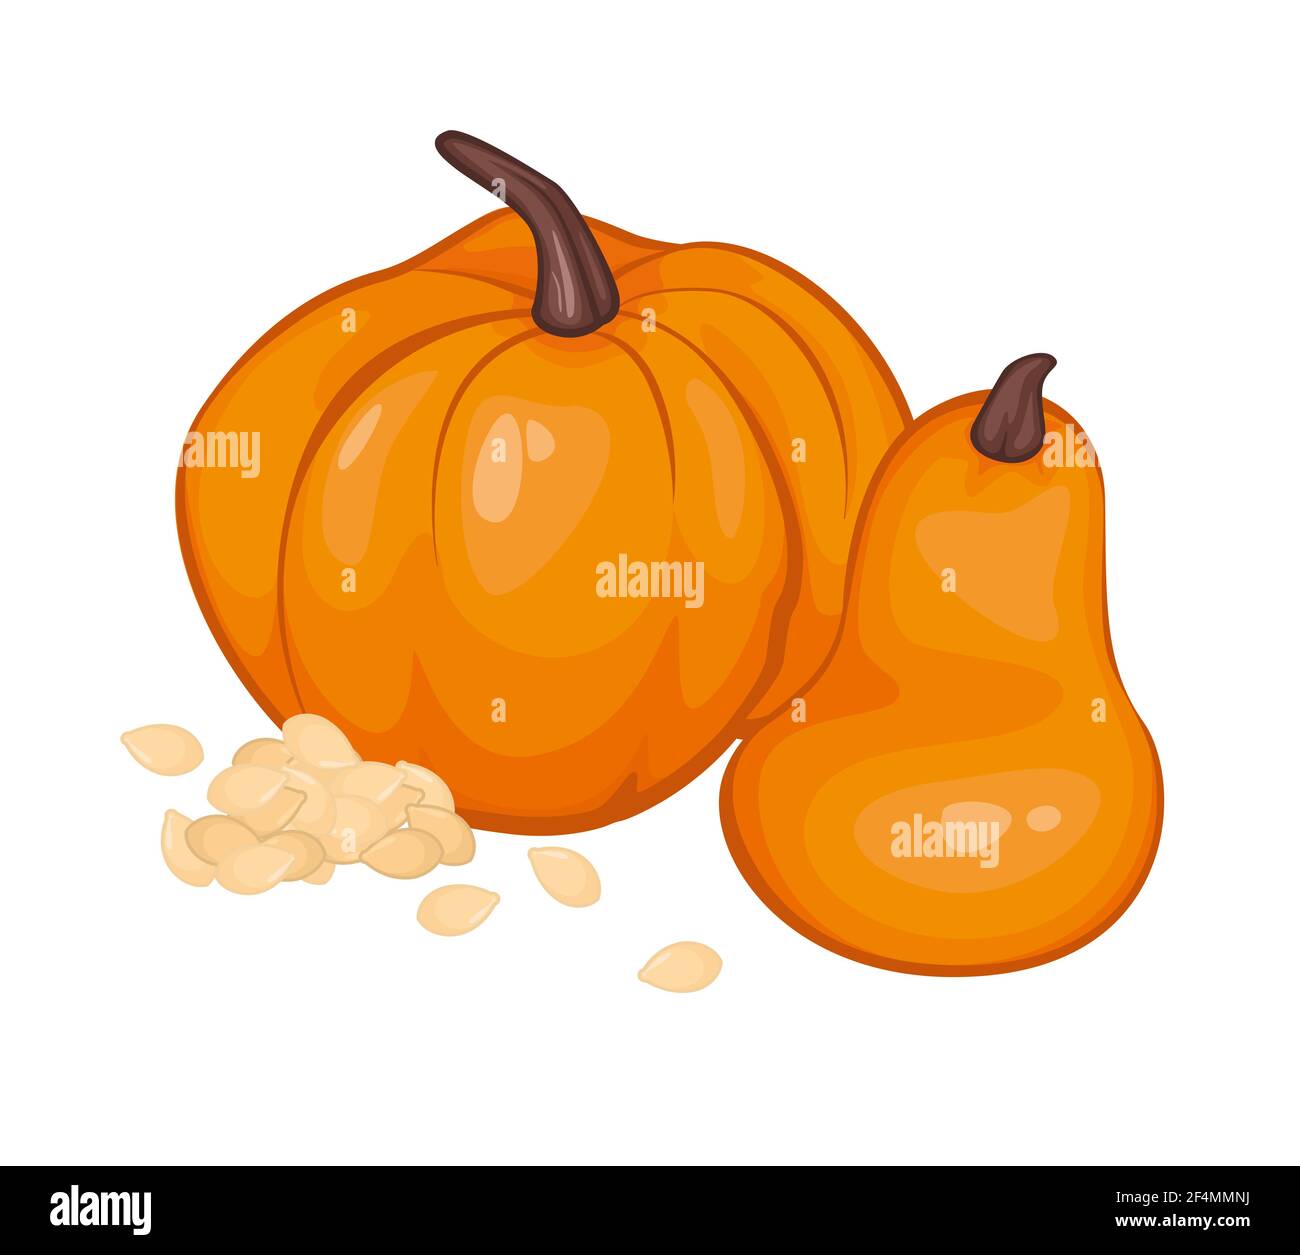 Pumpkins in carton style with pumpkin seeds. Isolated object. Vector illustration.Vegetable from the farm. Organic food. Stock Vector